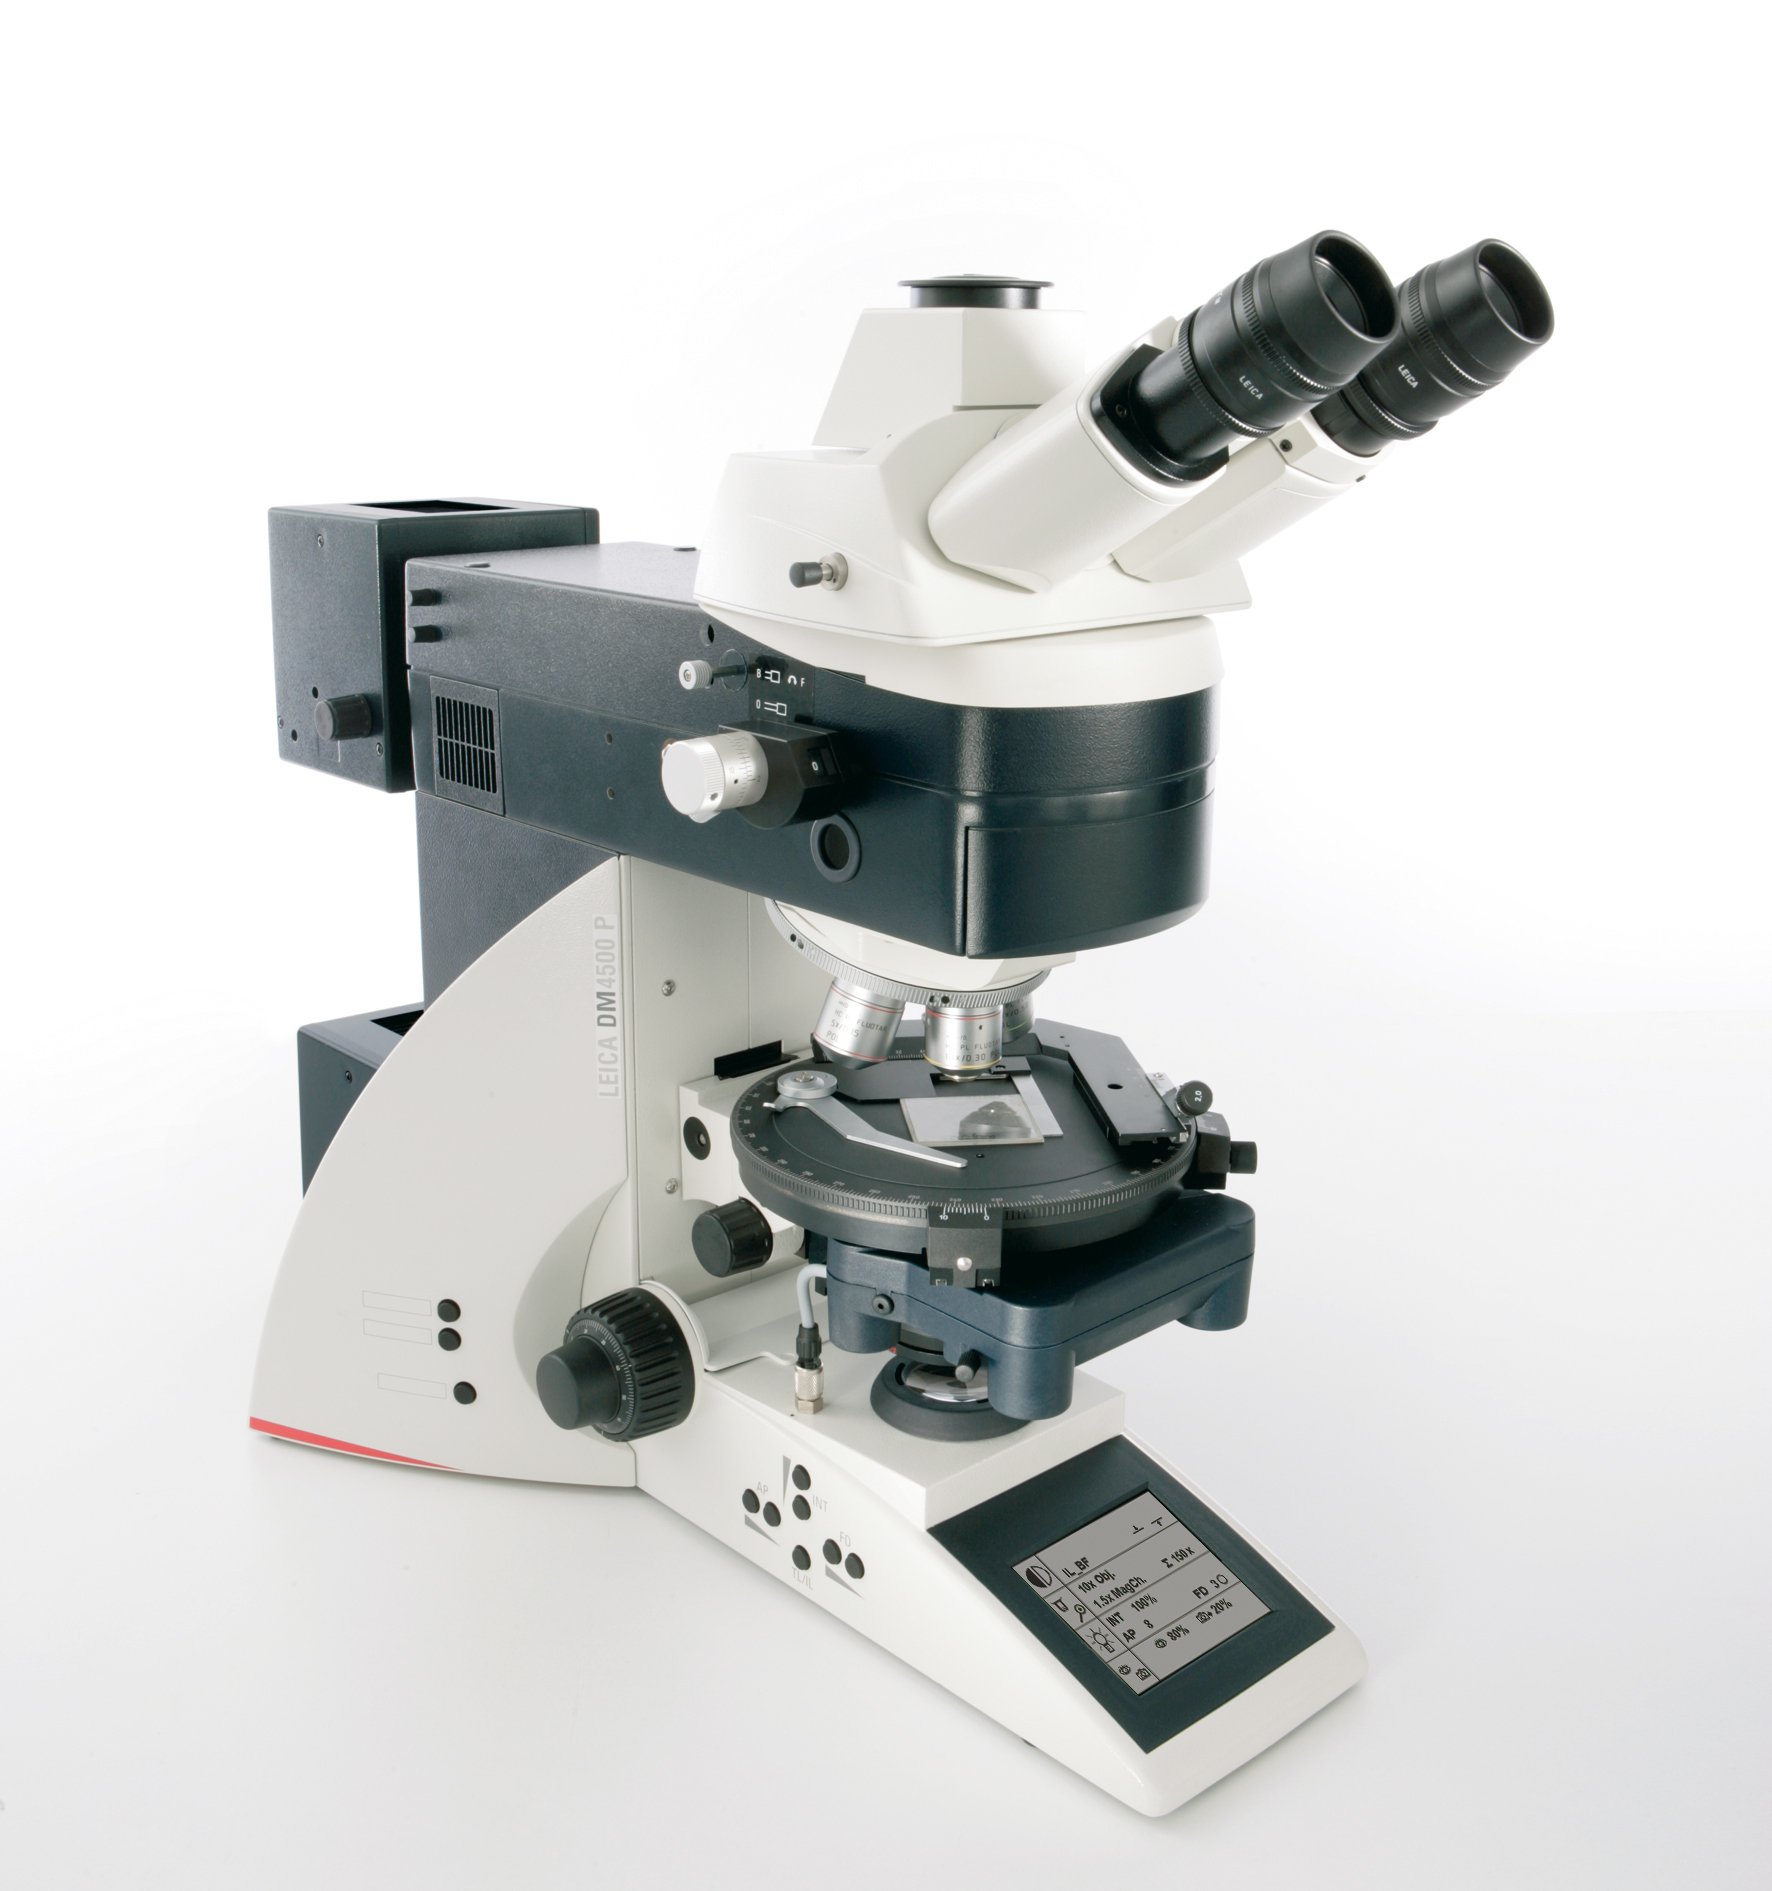 The Leica DM4500 P provides consistent, reproducible research and quality control results.